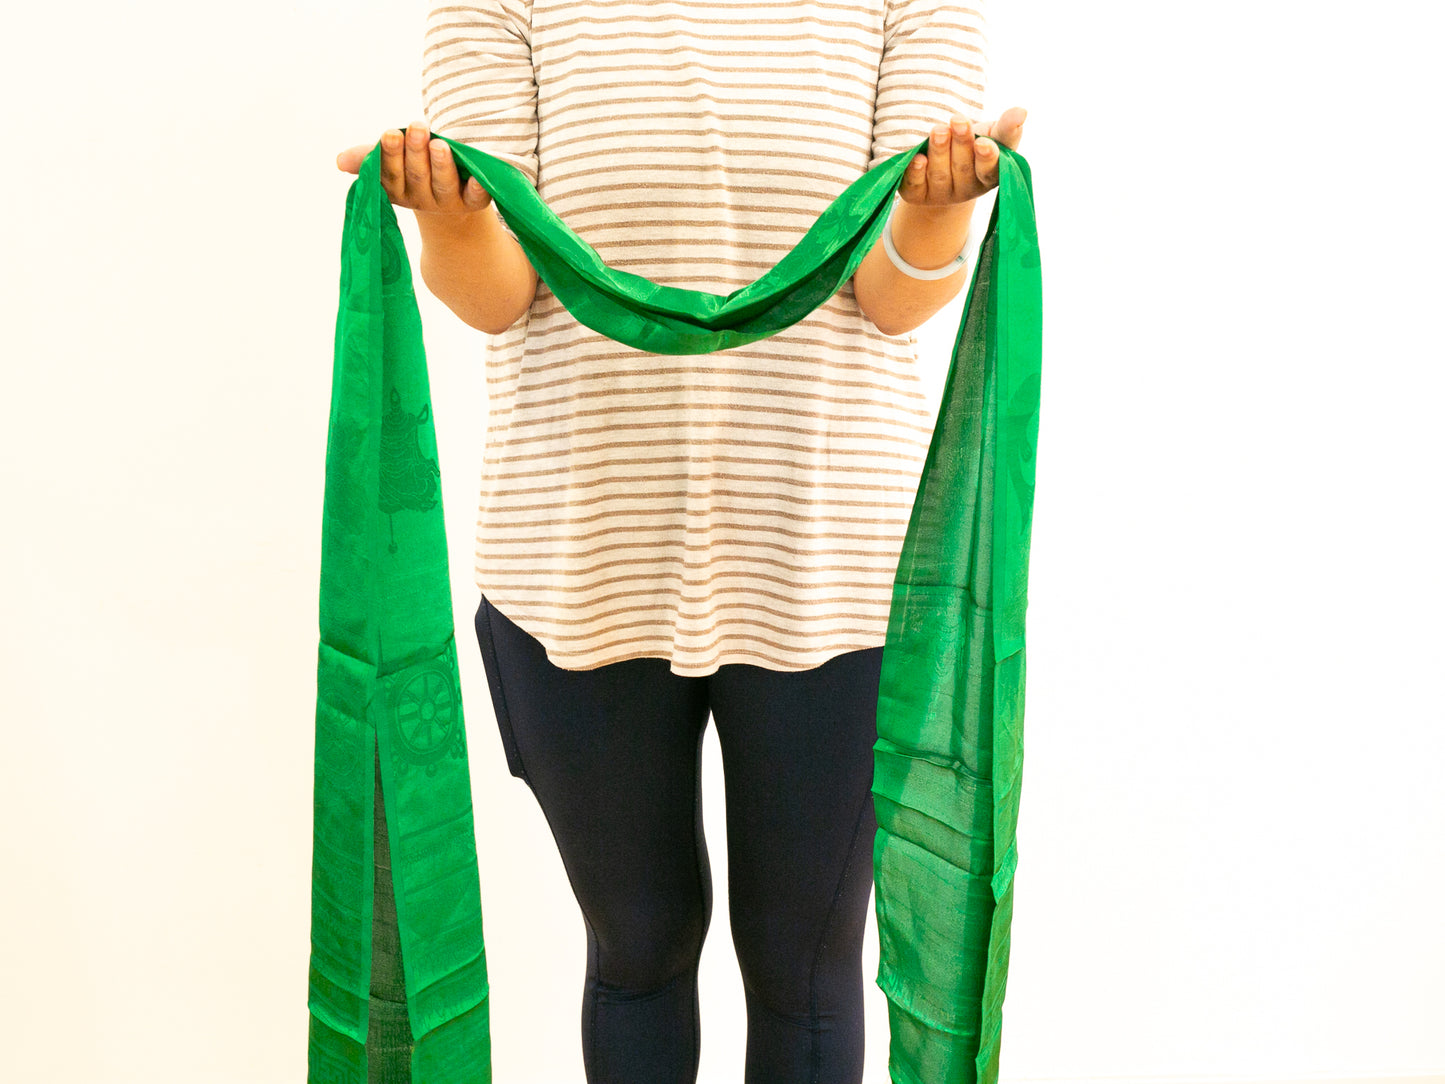 Green khata khada scarf held with open arms